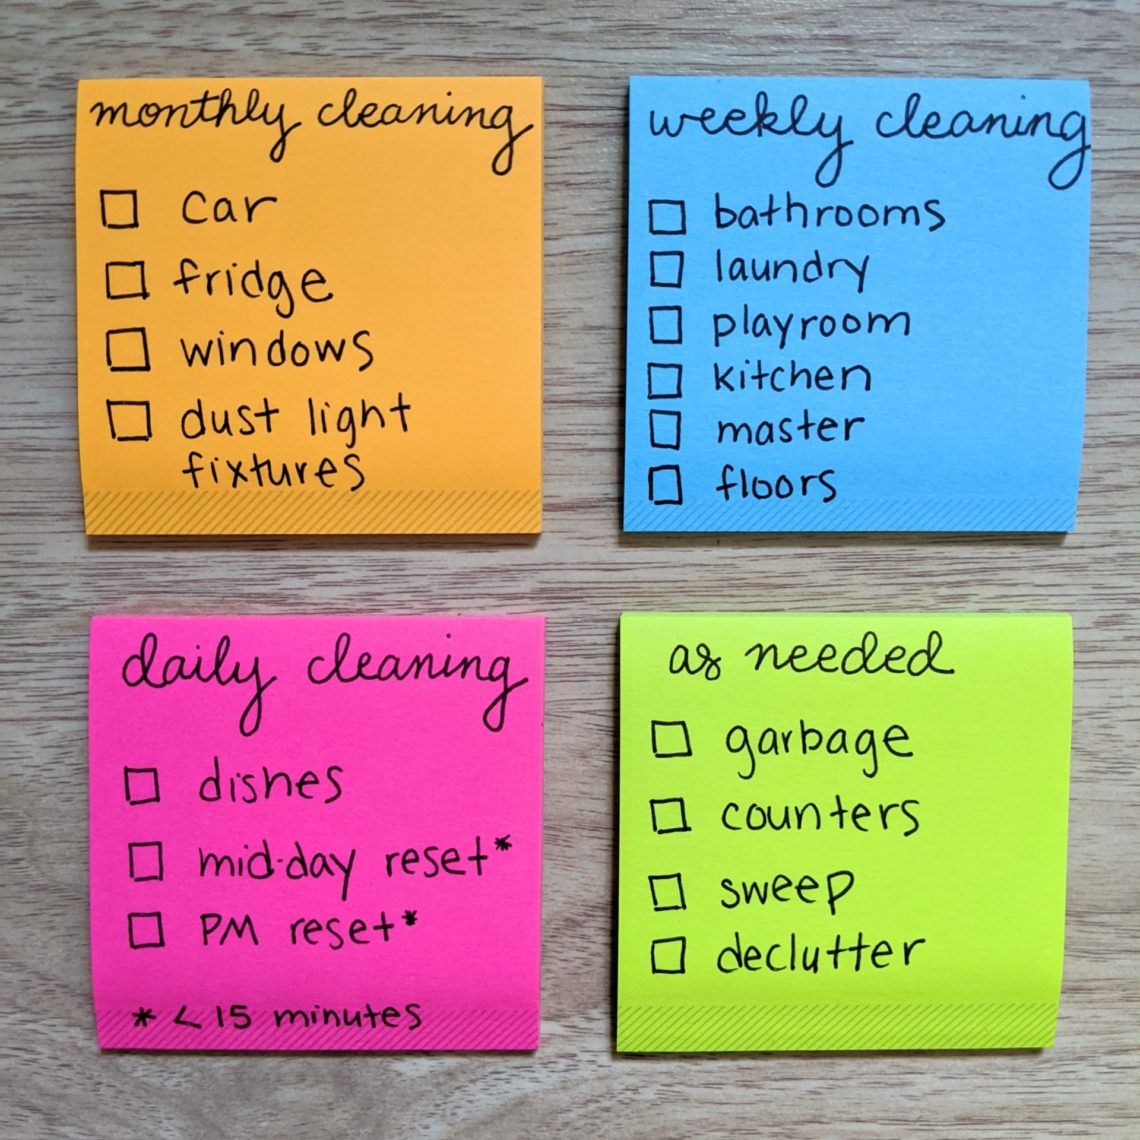 The Stay At Home Mom's Schedule - Striving For Miss Perfect